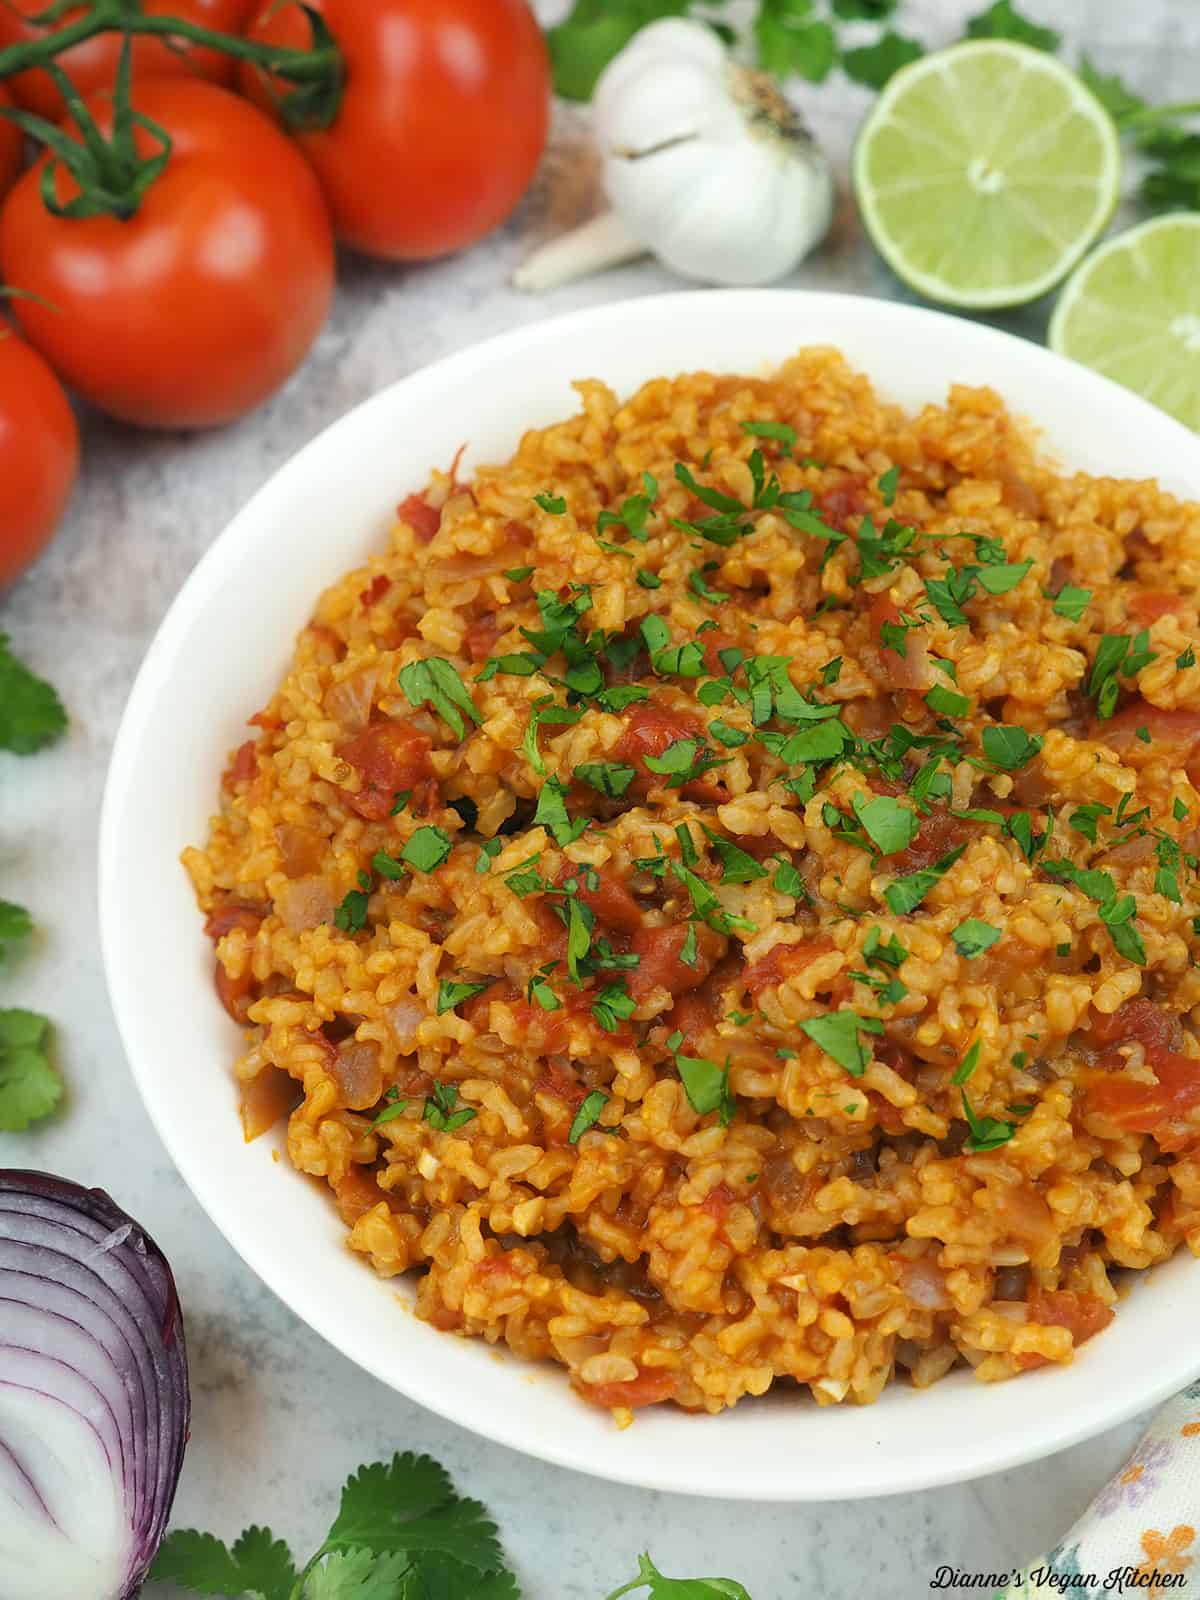 bowl of Spanish rice with lines, garlic, tomatoes, and onion